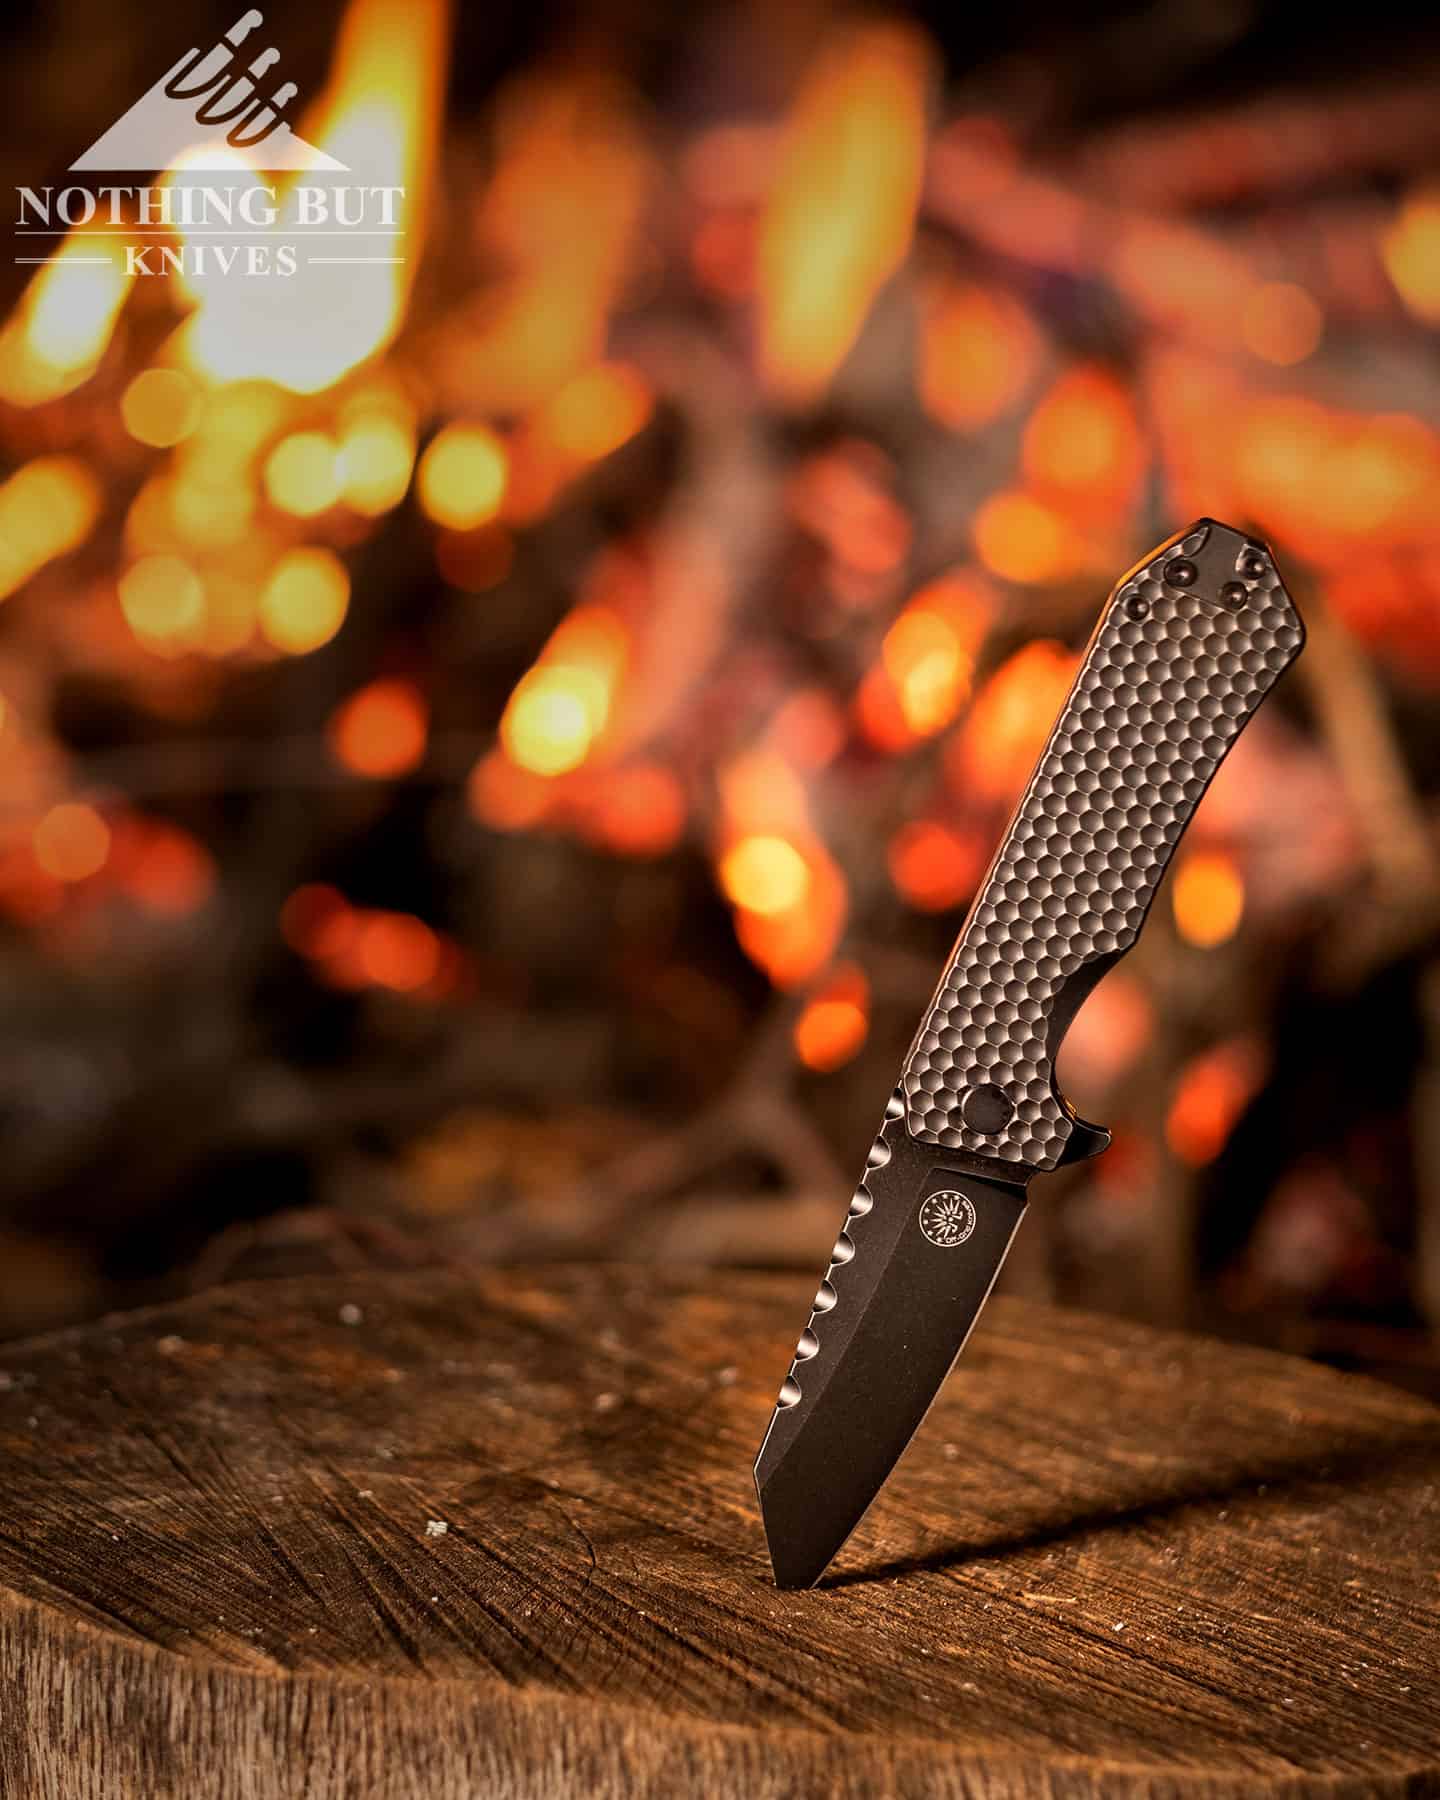 The award for best update of a knife that was already pretty good goes to the Off-Grid Black Mamba V2.  